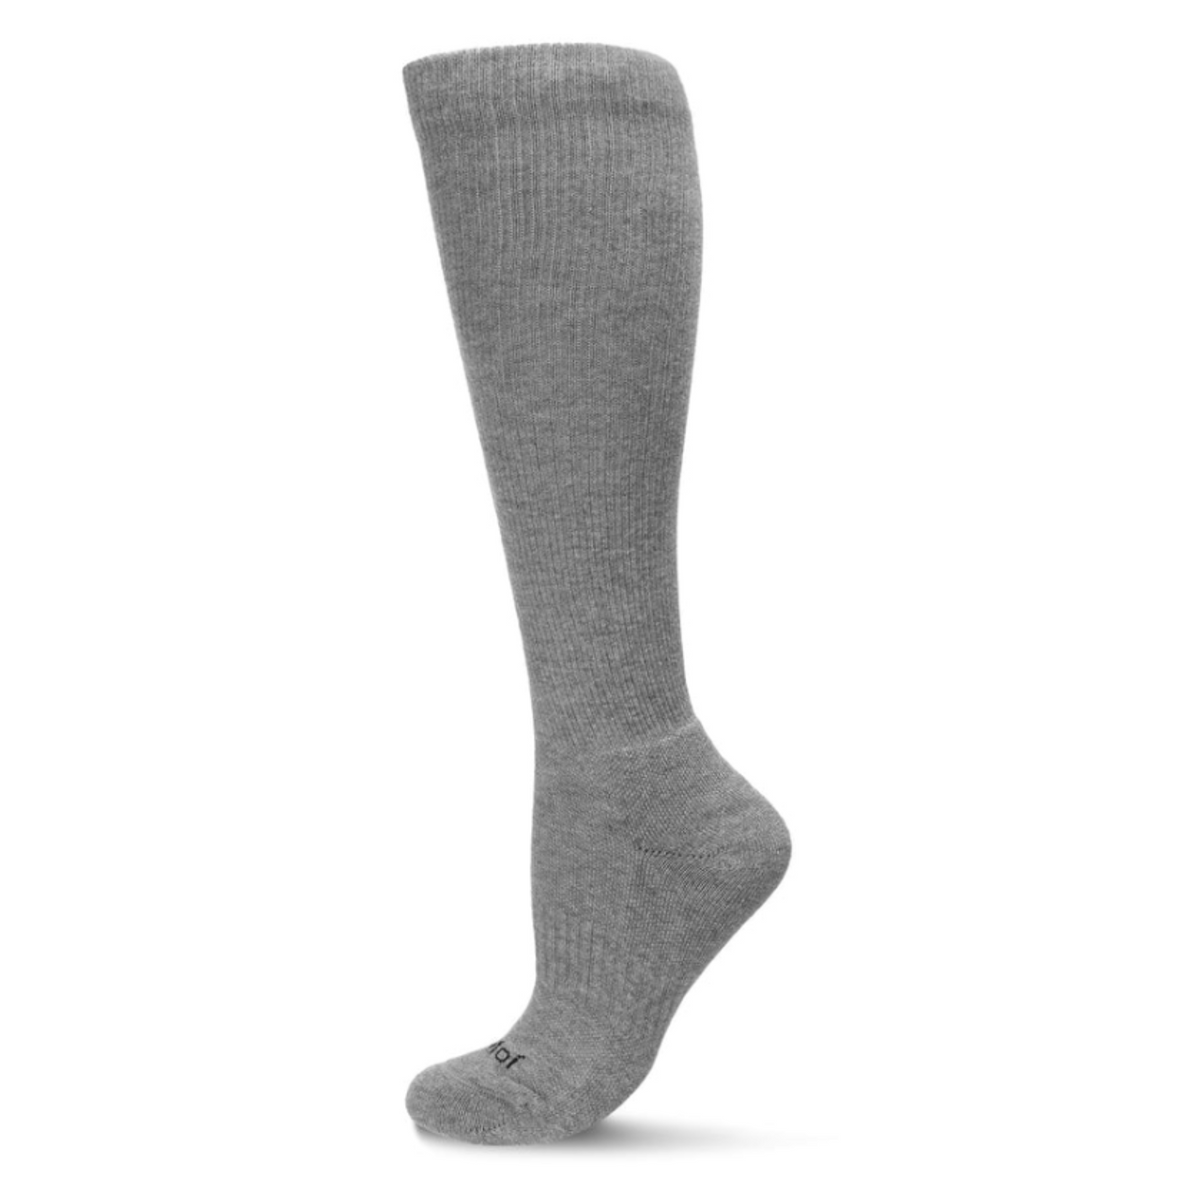 MeMoi Classic Athletic Cushion Sole Cotton Moderate Graduated Compression in gray from side